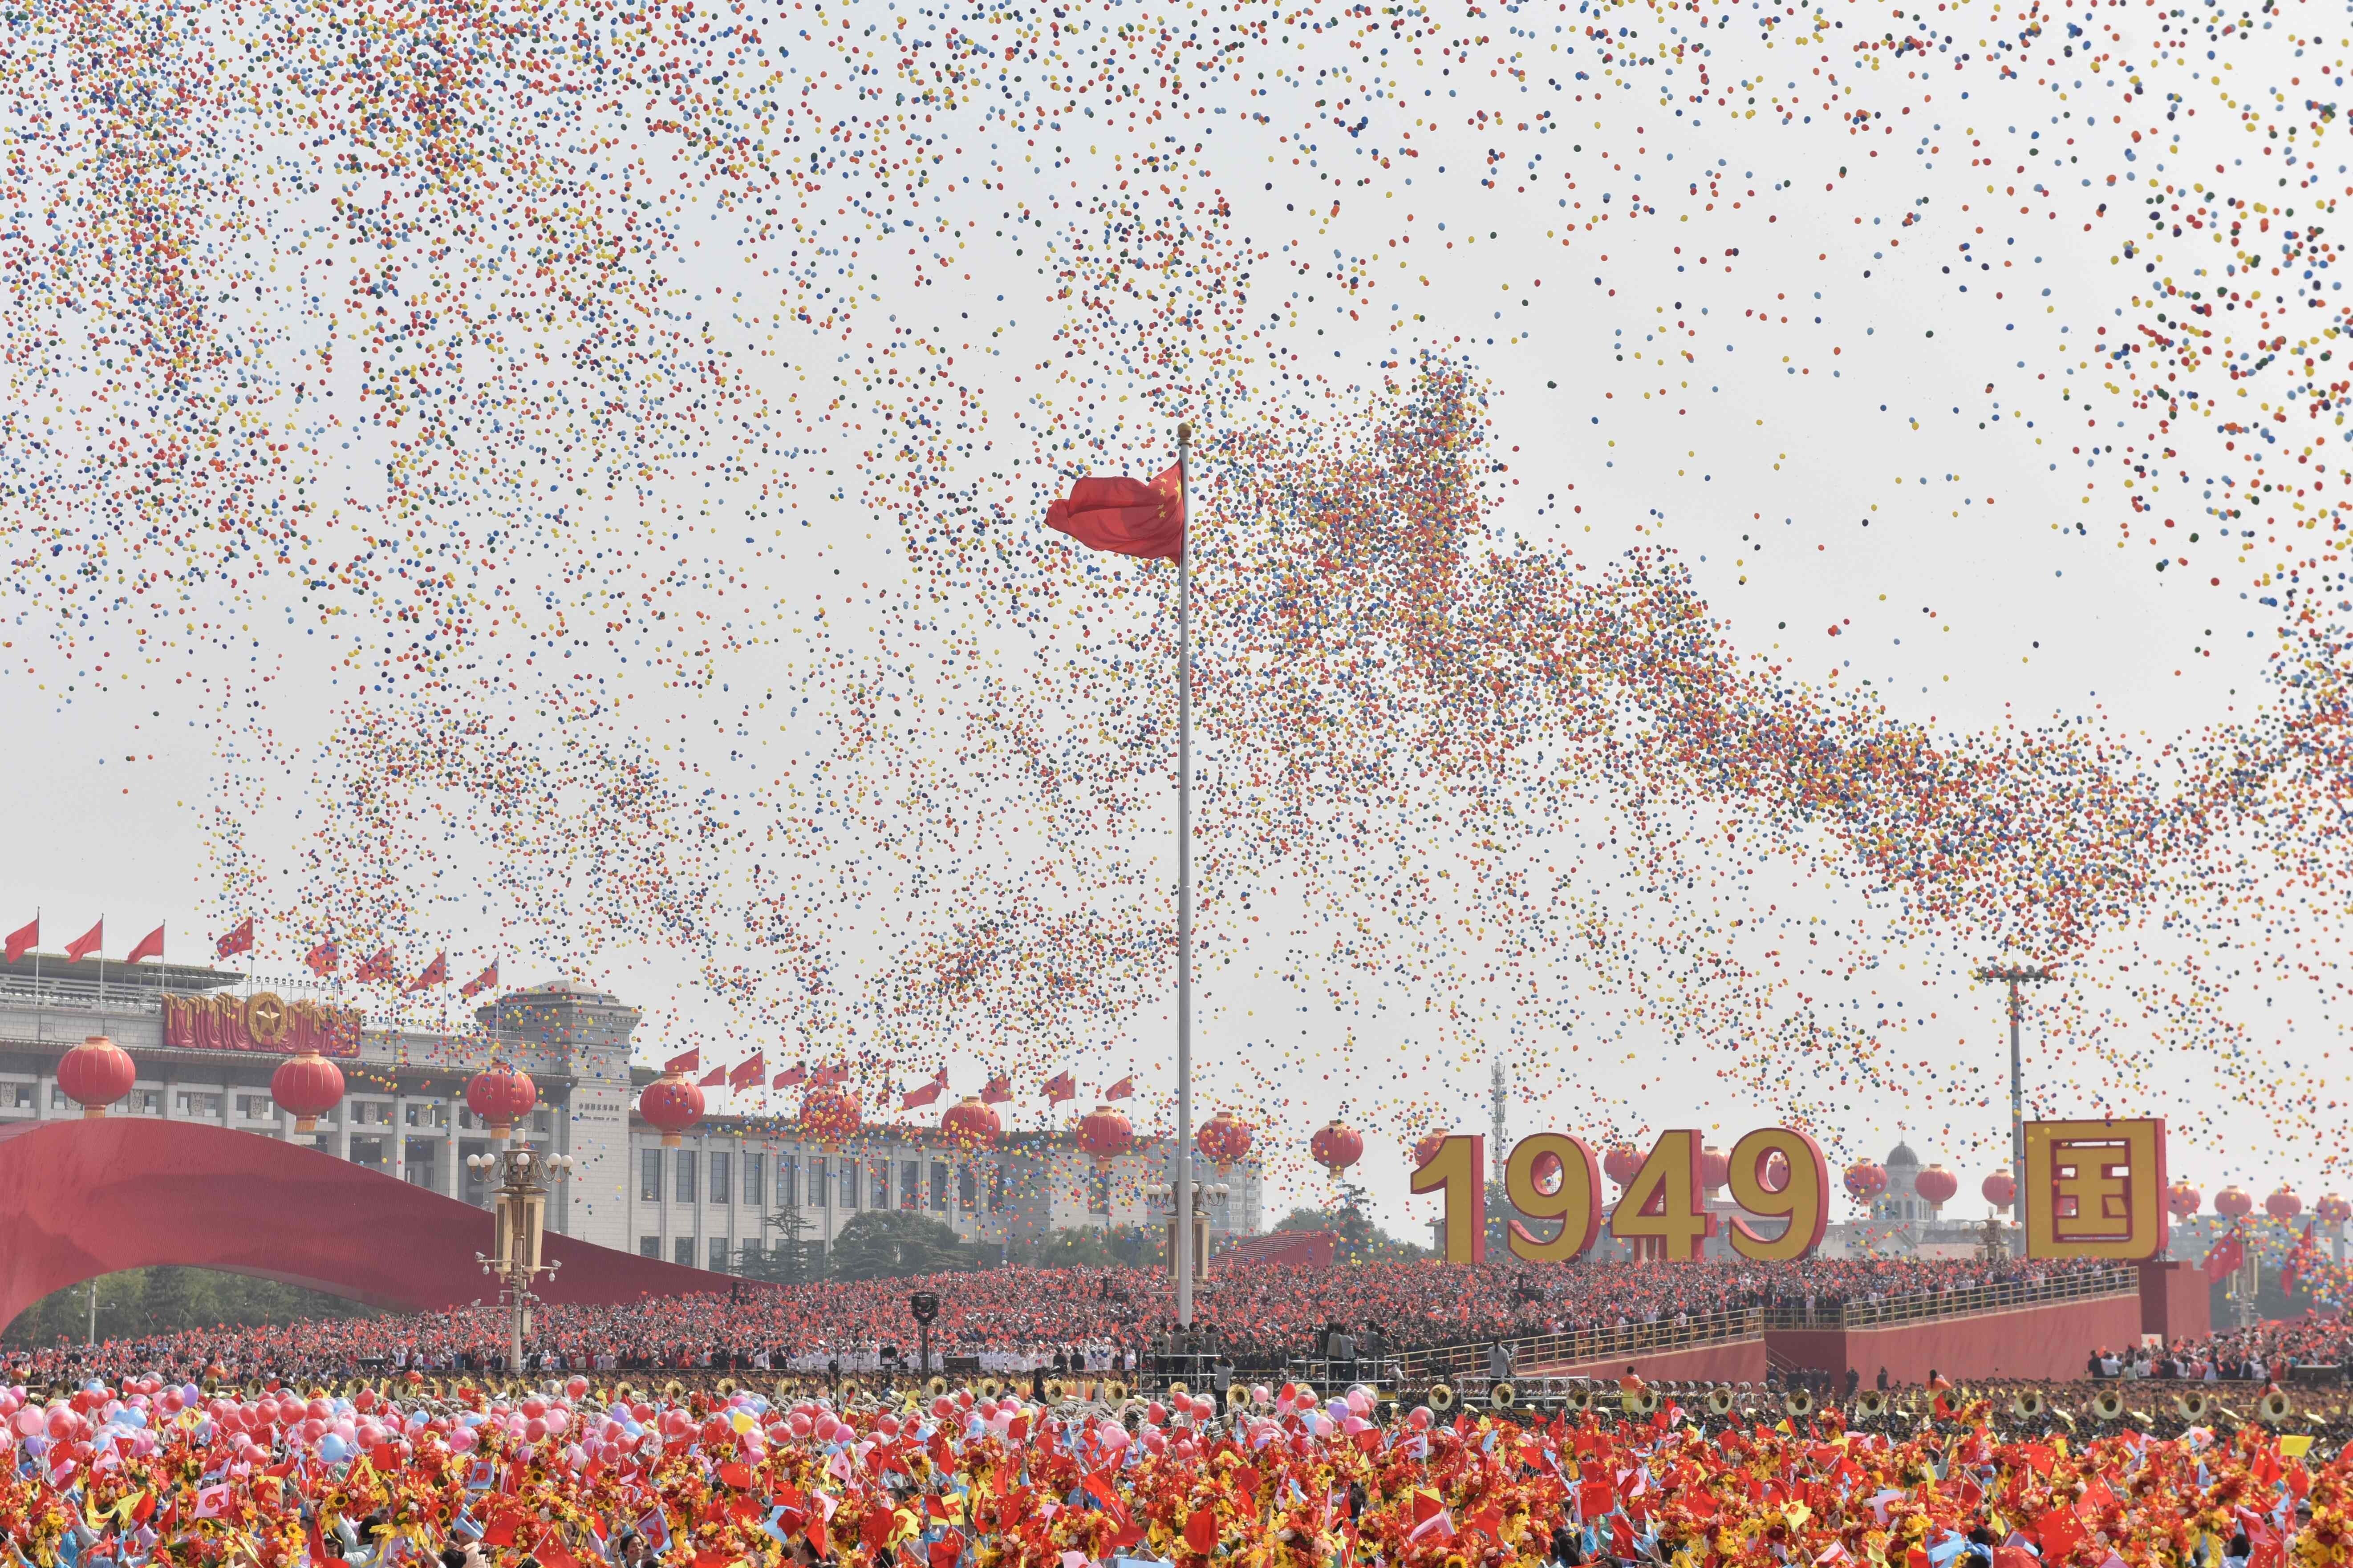 Balloons fly past the national flag at the end of a military parade at Tiananmen Square in Beijing on October 1, 2019, to mark the 70th anniversary of the founding of the People's Republic of China. Photo: AFP